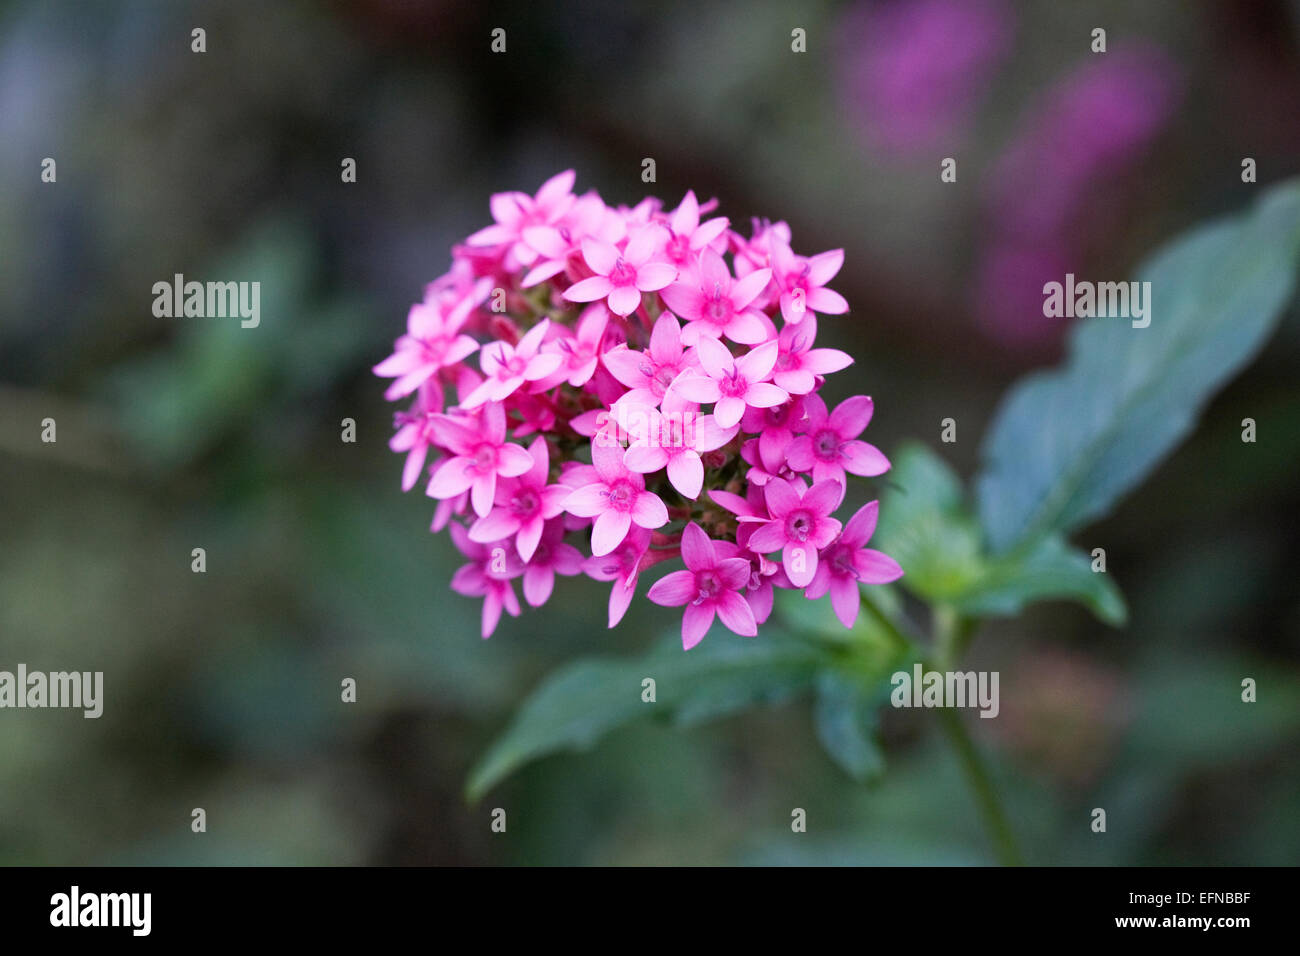 Pentas lanceolata. Egyptian starcluster flower growing in a protected environment. Stock Photo